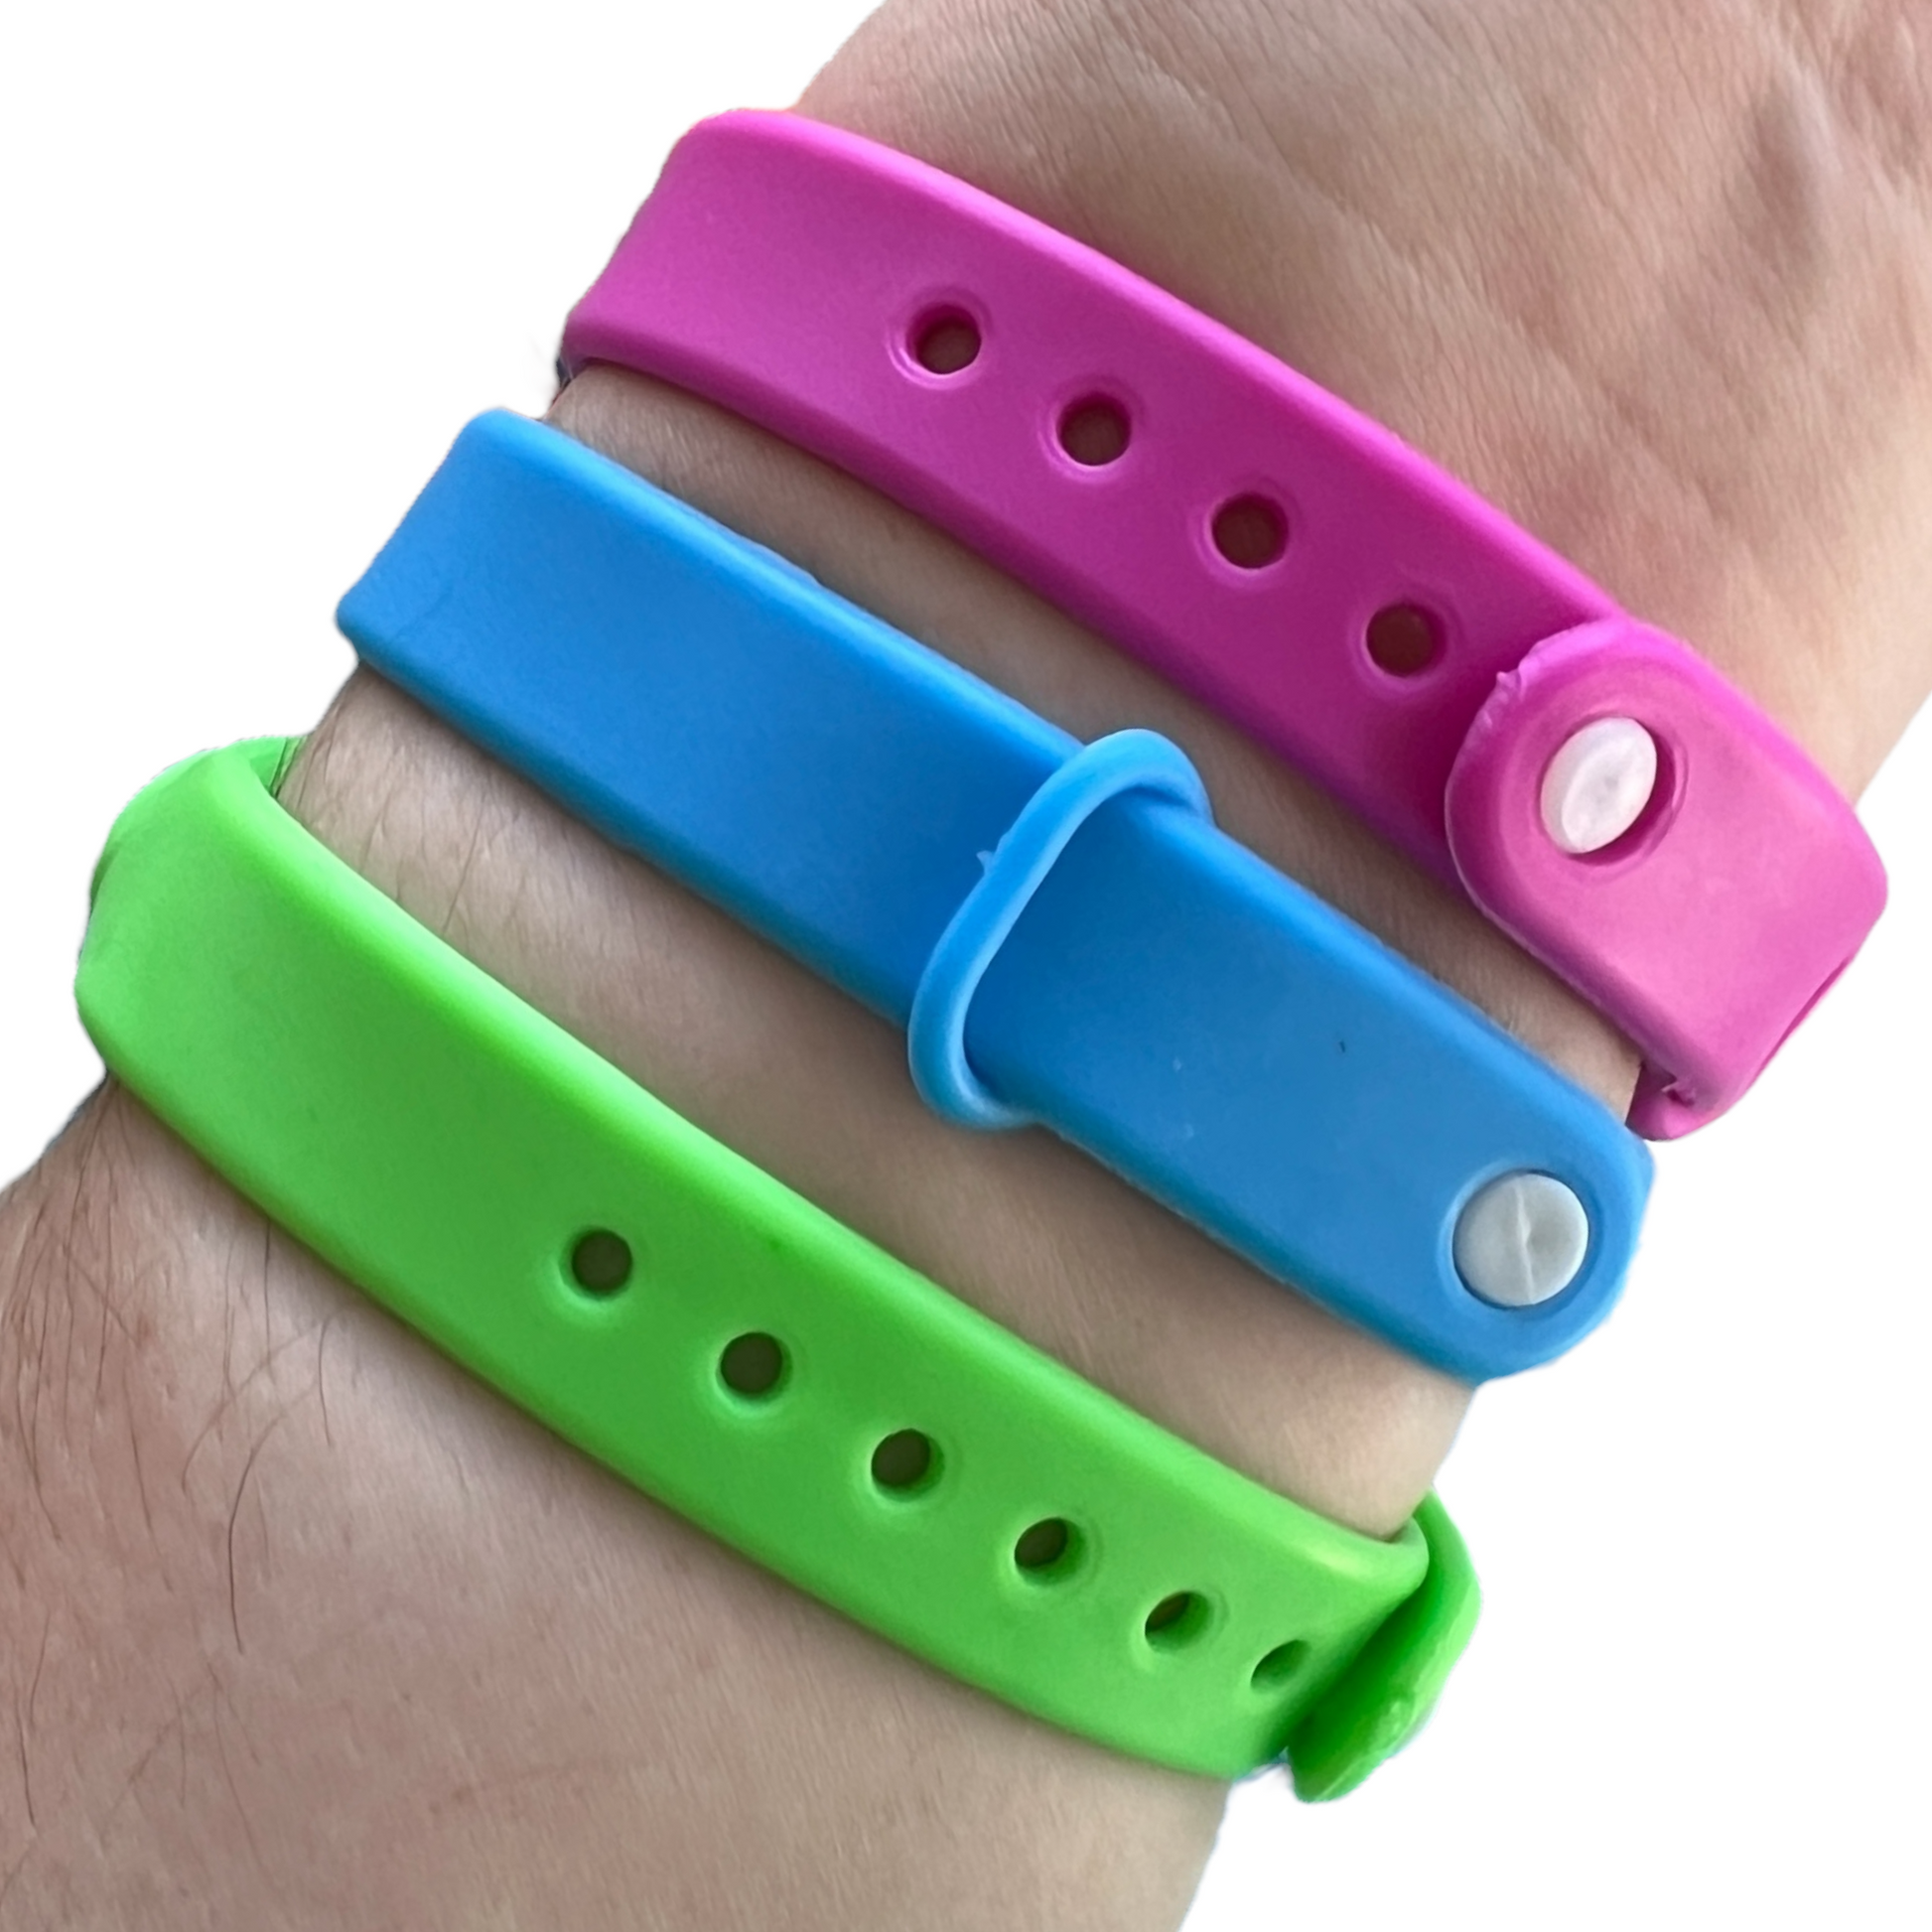 Waterproof Insect Repellant Bracelet Skin Insect Repellent SPIRIT SPARKPLUGS   